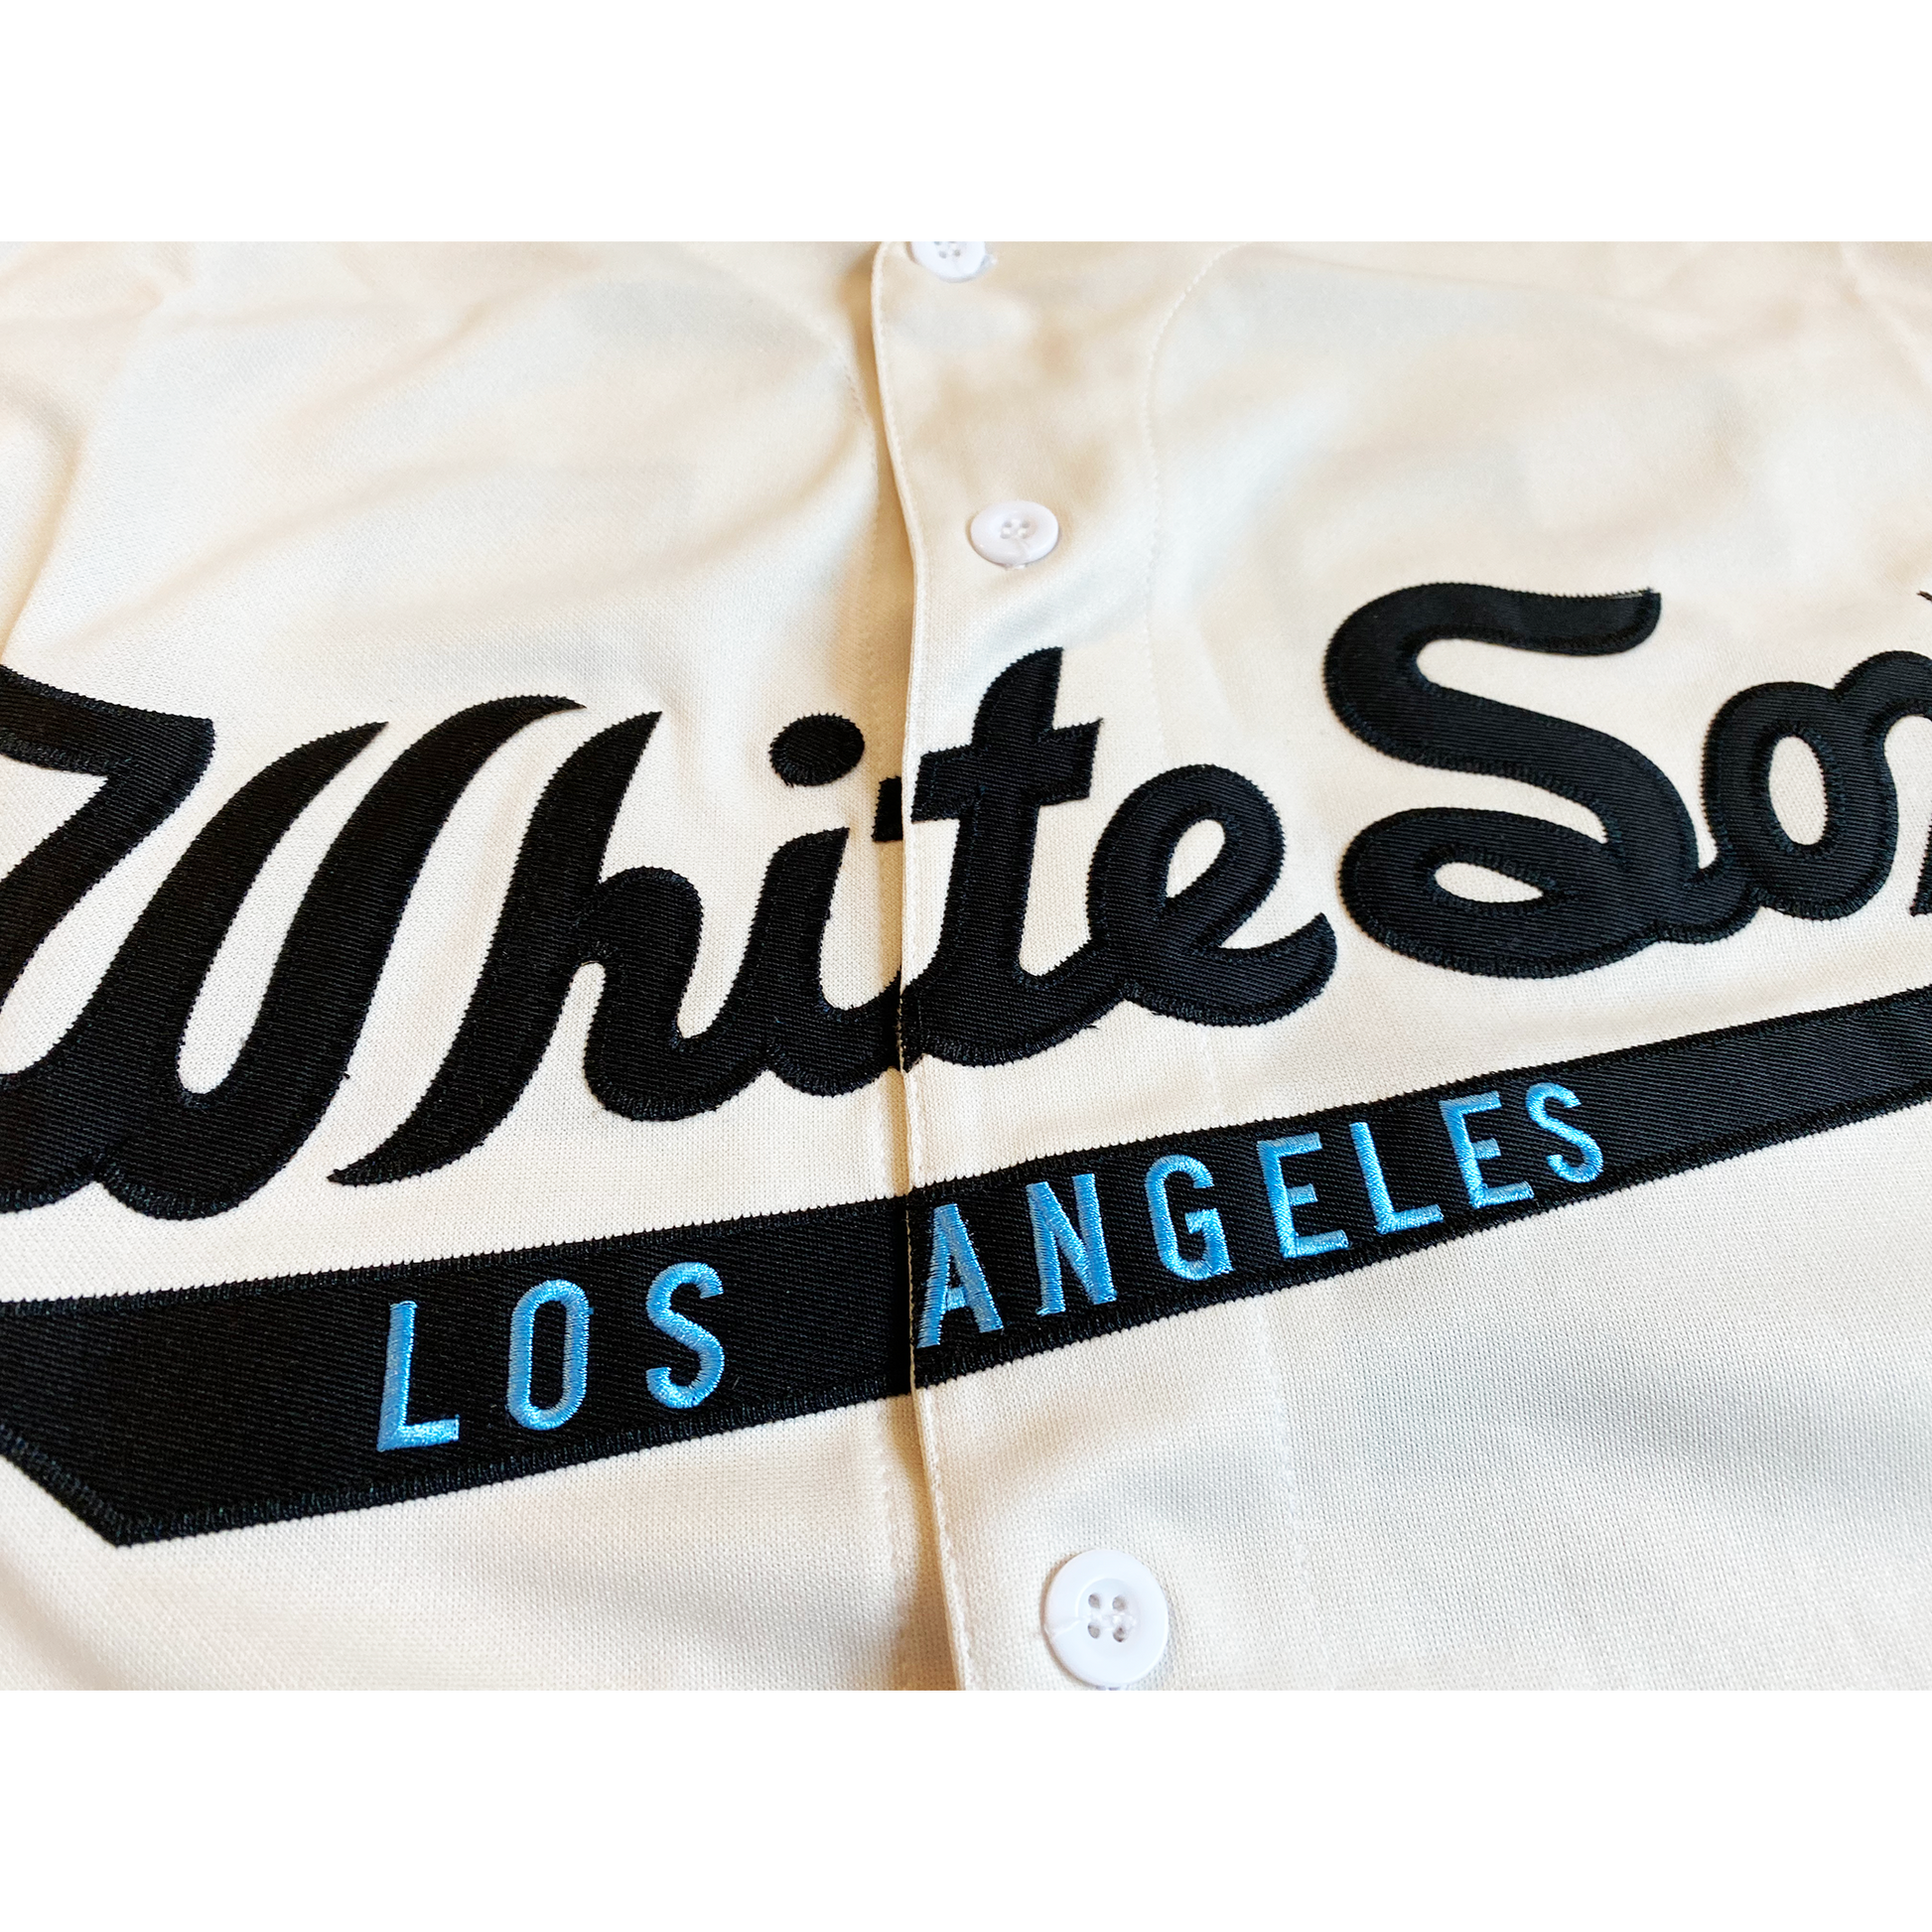 buy cheap los white sox jersey ,Chicago White Sox Gifts, White Sox